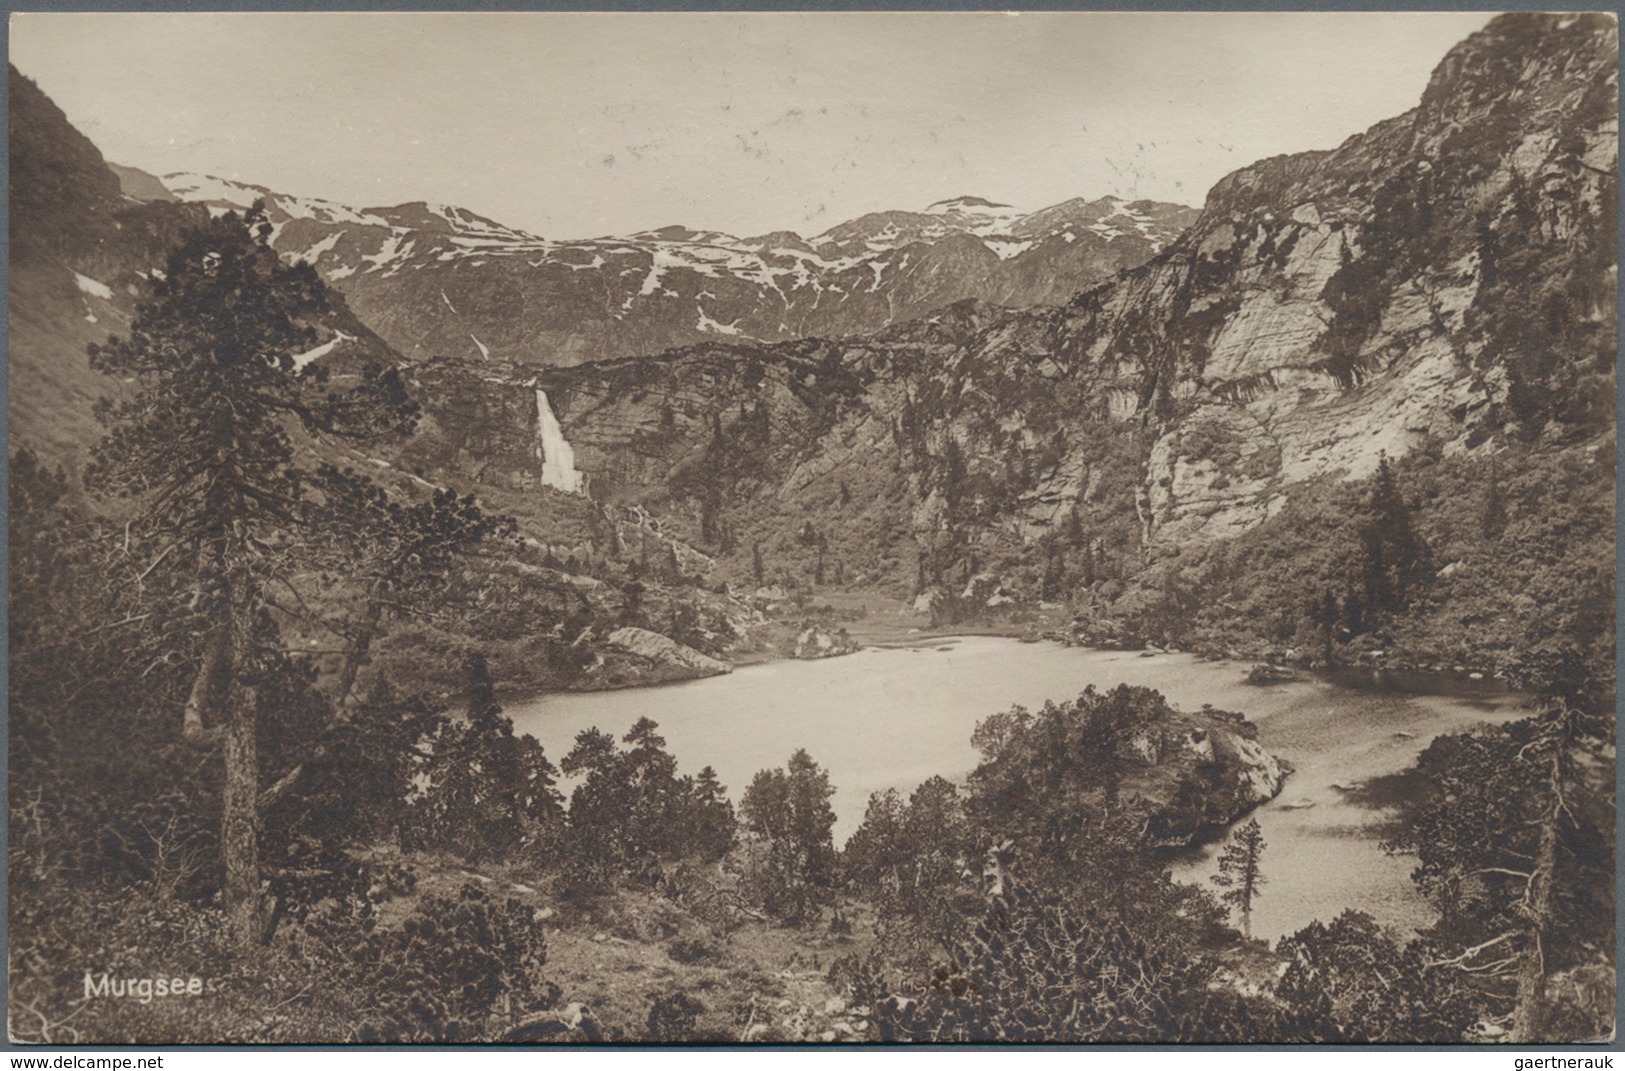 Zeppelinpost Europa: 1929. Murgsee Real Photo RPPC Flown On The Graf Zeppelin LZ127 Airship's 1929 S - Europe (Other)